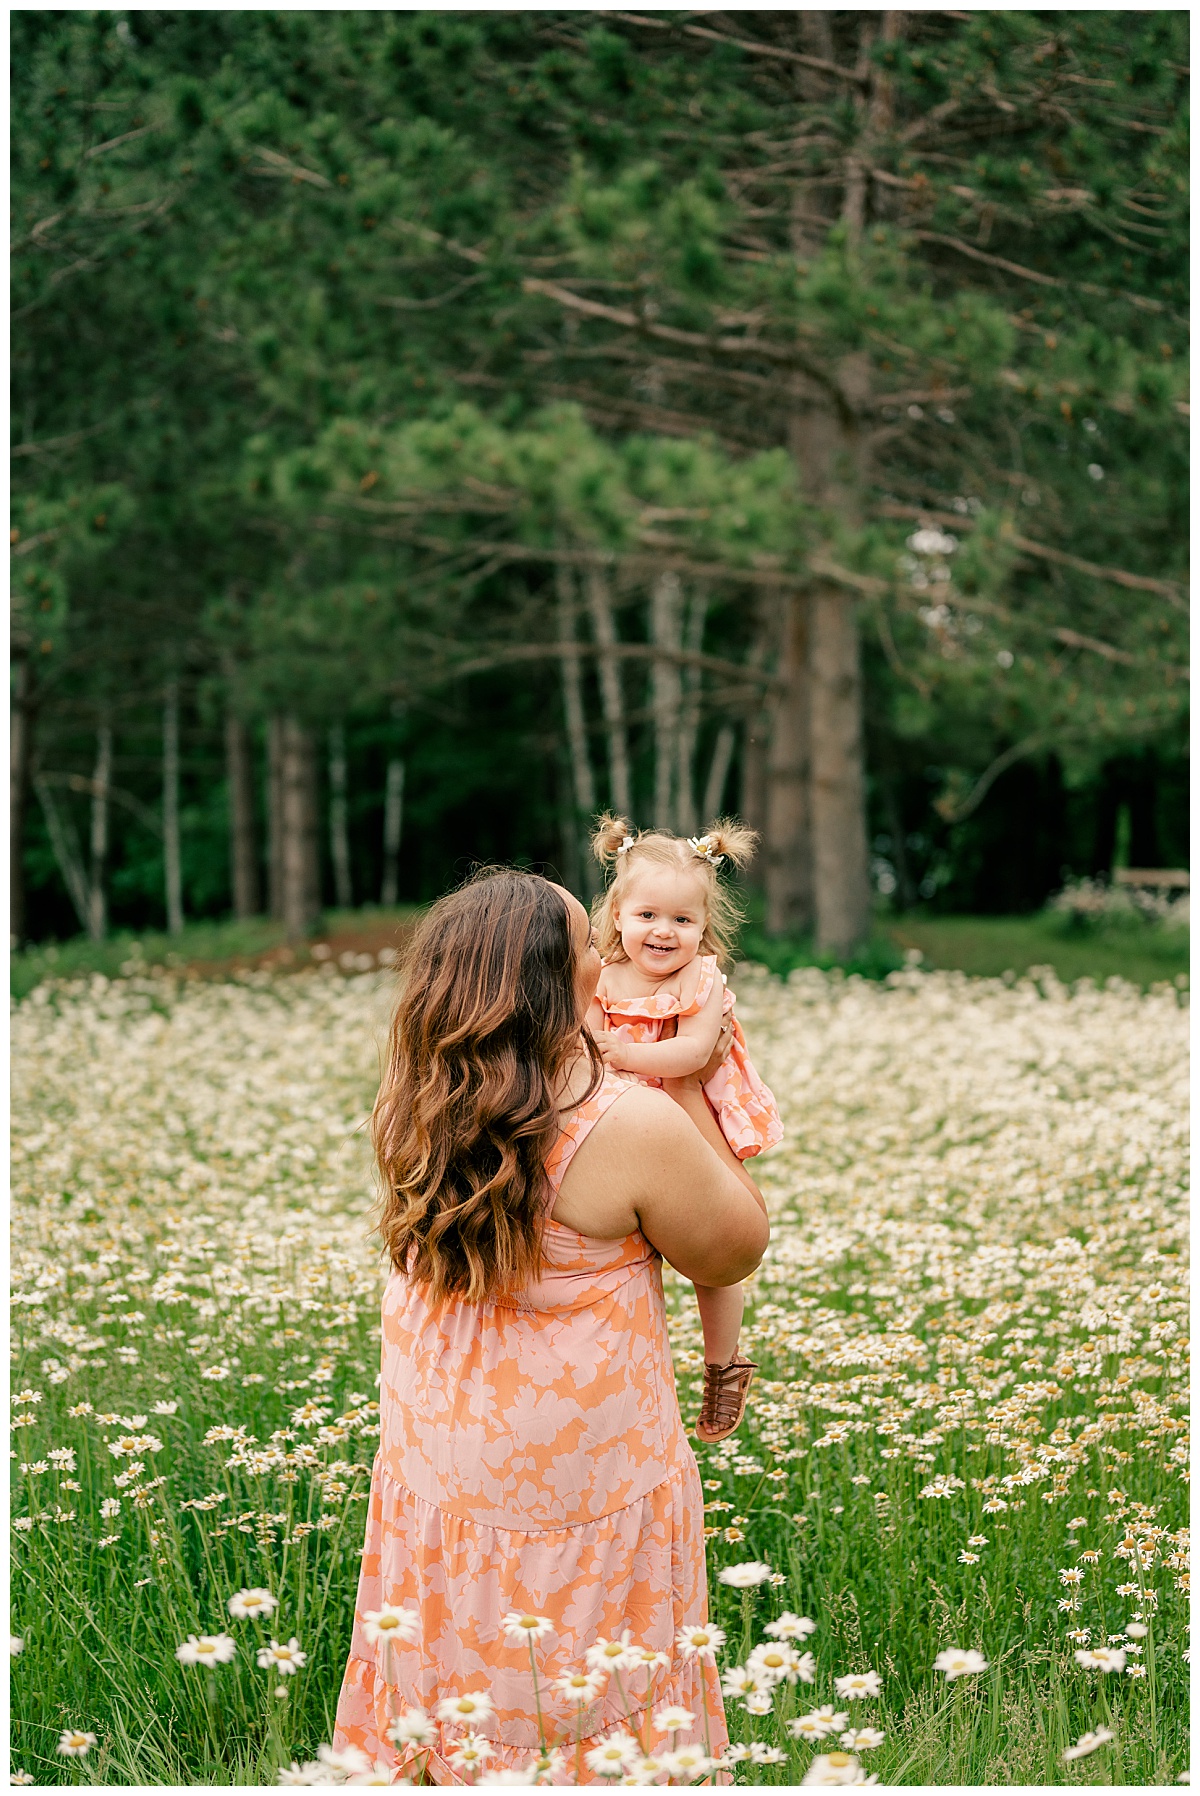 mother holds up toddler in field of flowers during professional photos